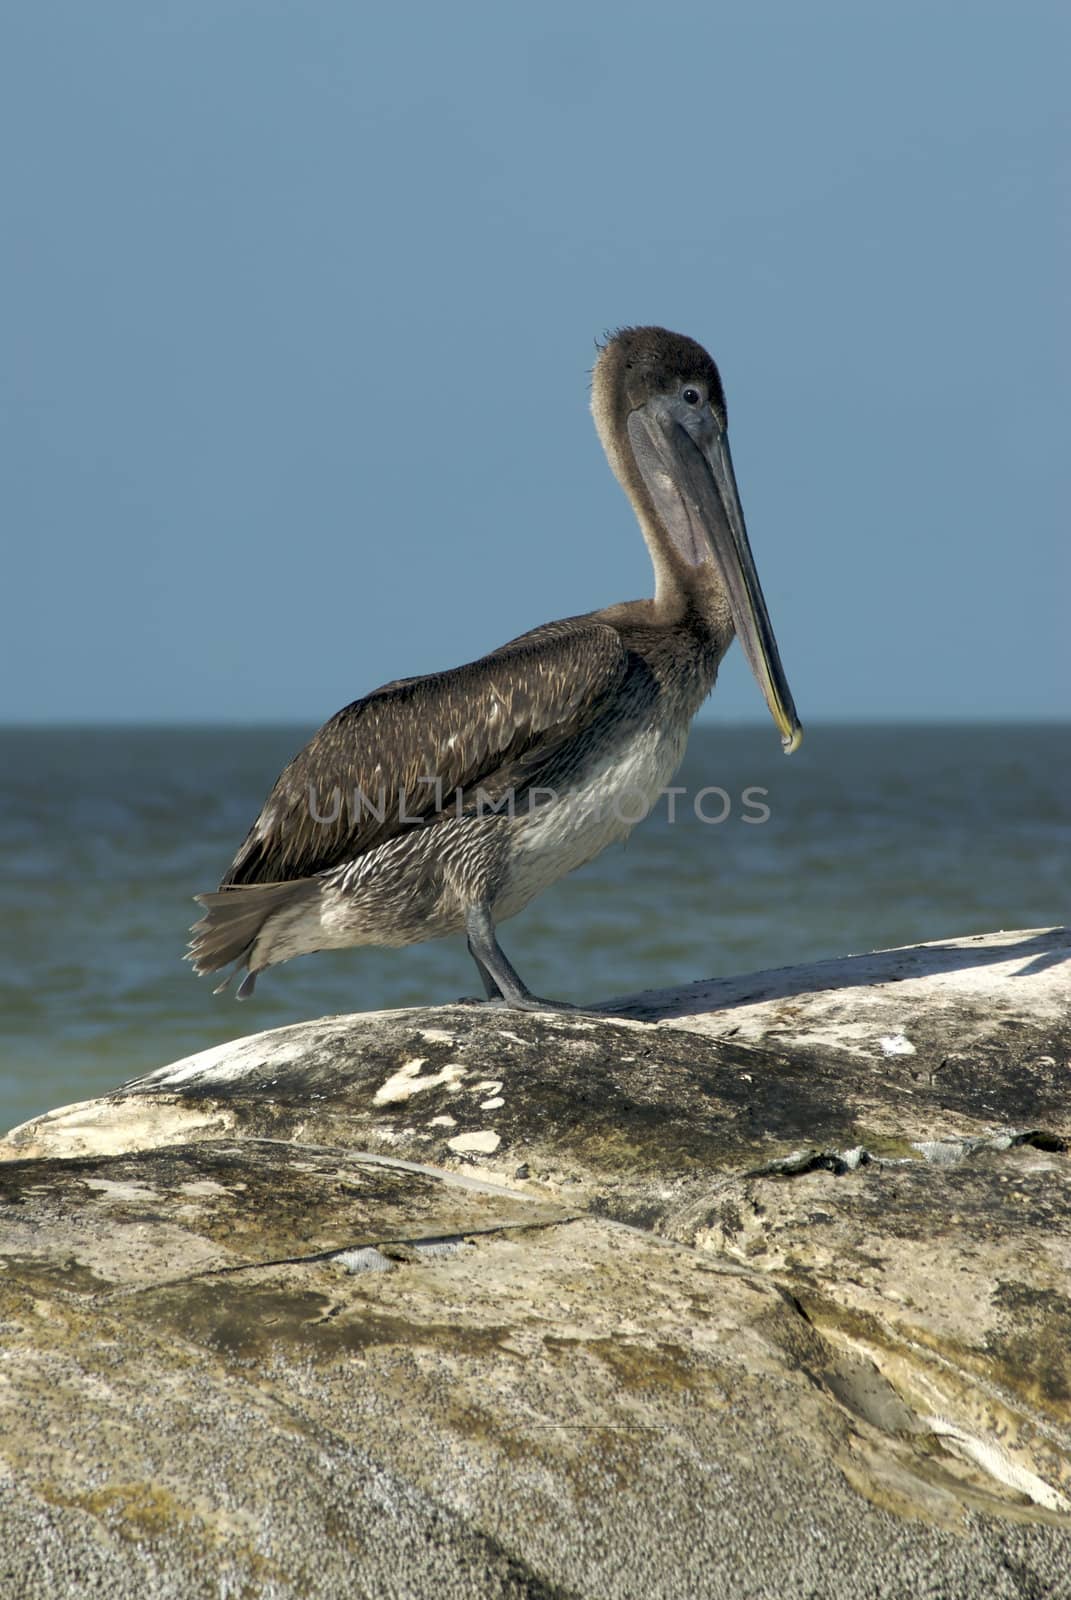 Pelican on rocks by npologuy